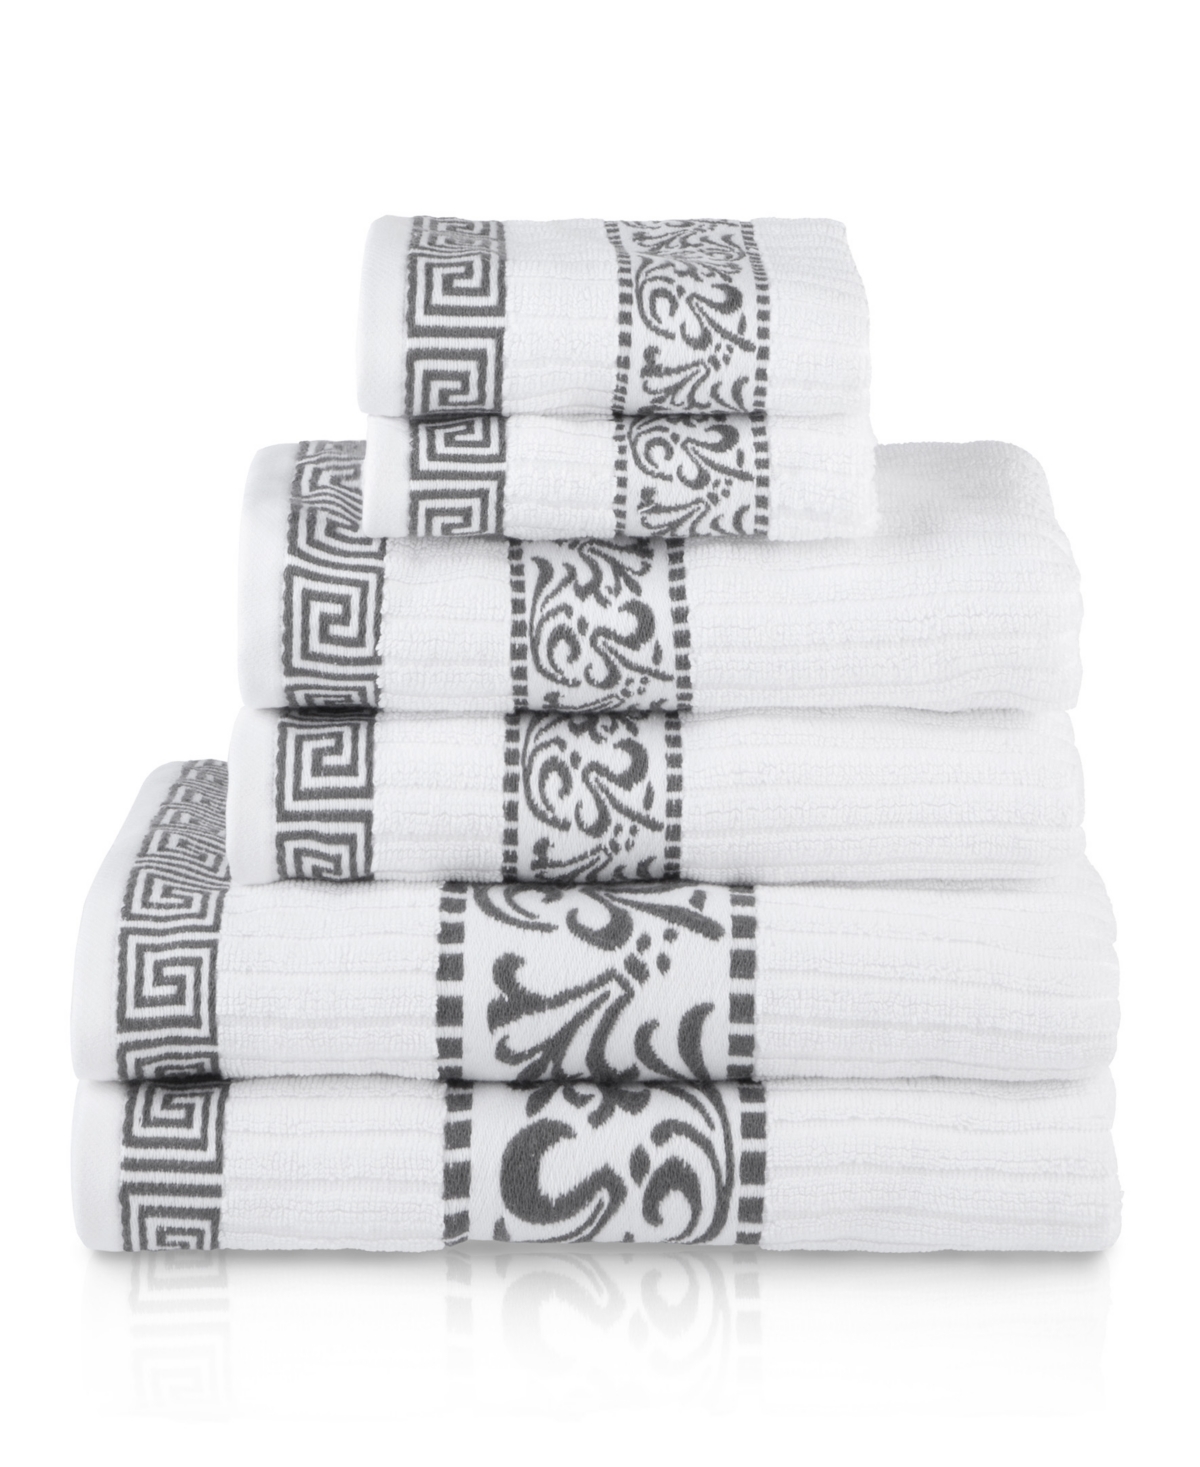 Superior Athens Cotton With Greek Scroll And Floral Pattern Assorted, 6 Piece Bath Towel Set In Gray